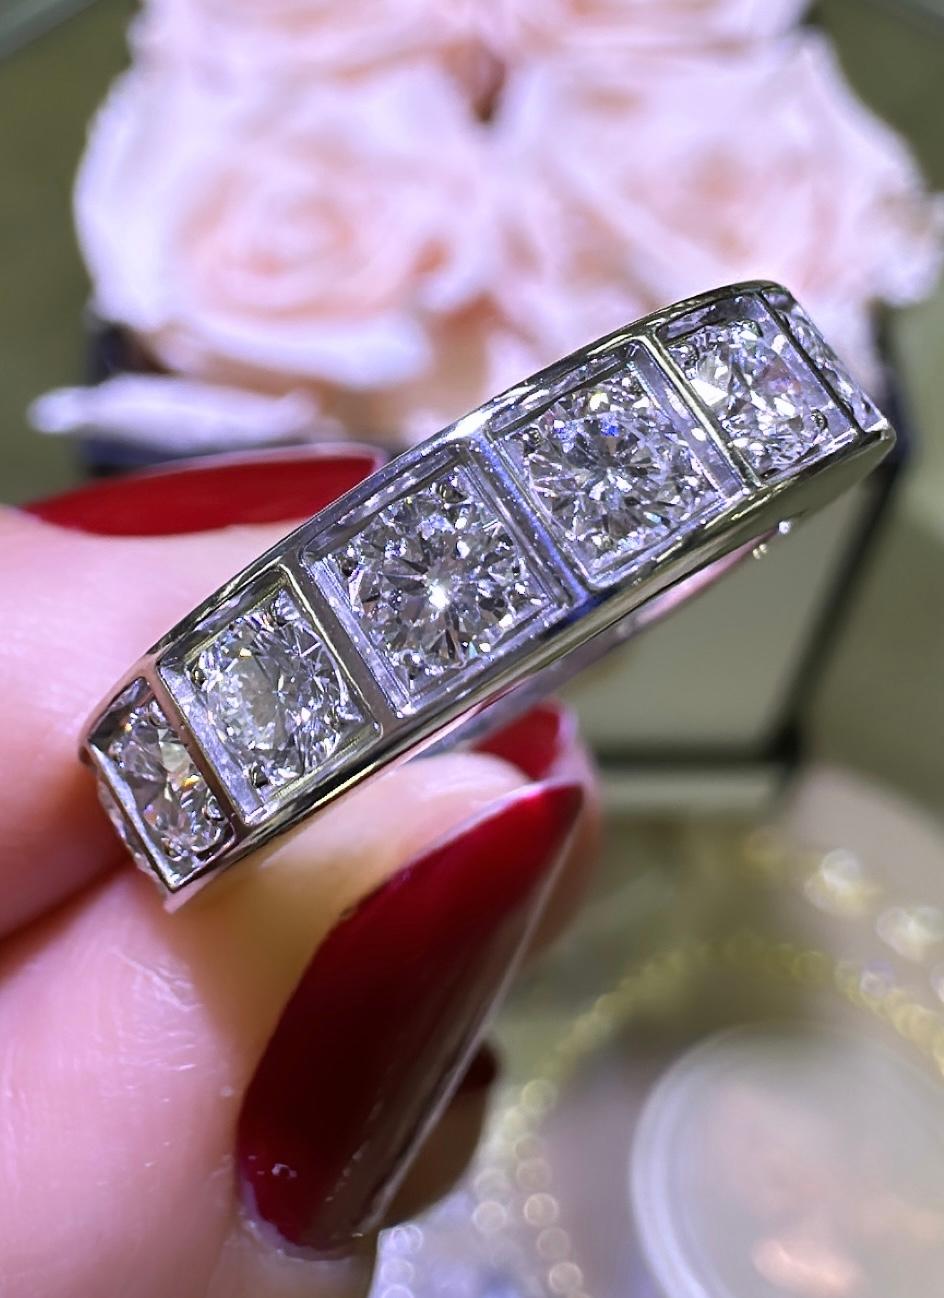 Cartier 750 white gold 18K anniversary band ring, width 5 mm, set with 9 brilliant-cut diamonds totaling approx. 1.35carats 
Size: 52 / 6.5 sizable W: 5mm
SKU: 129841
